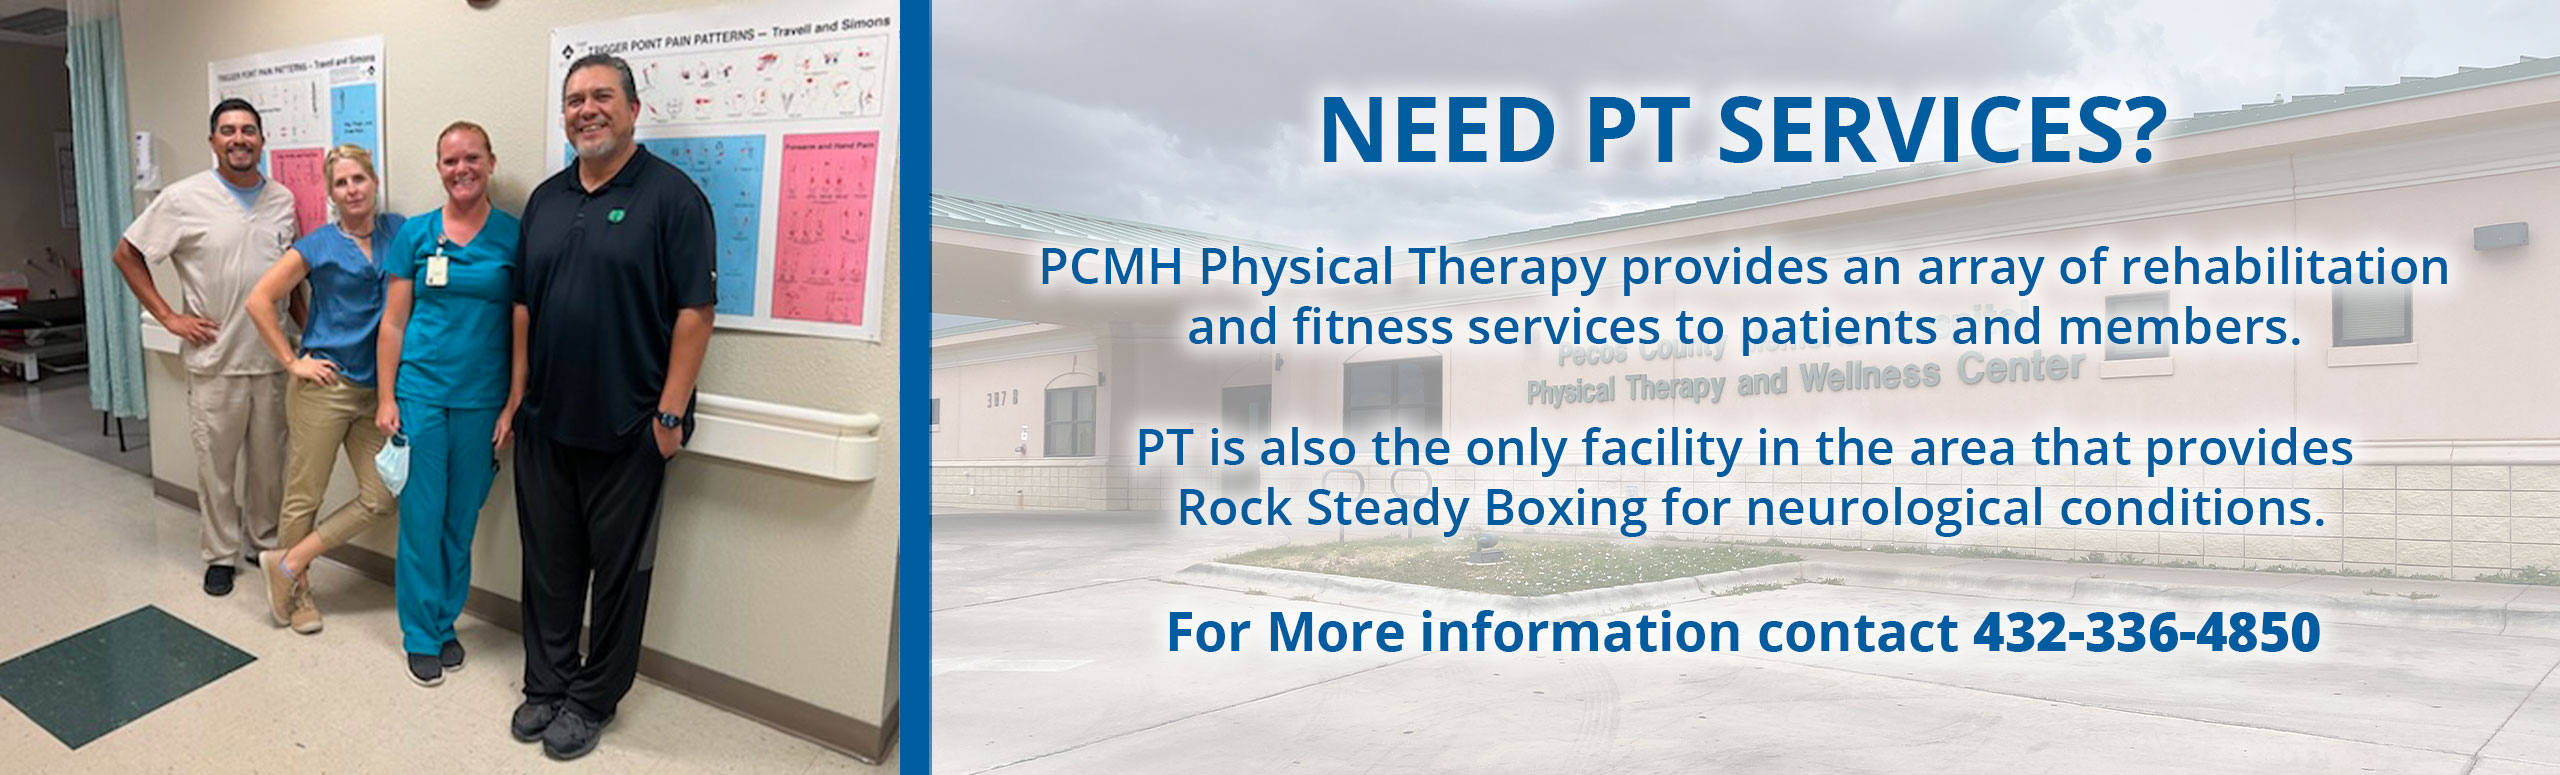 Banner picture of four PCMH Physical Therapist. There is two females and two males smiling. Banner says:

NEED PT SERVICES?

PCMH Physical Therapy provides an array of rehabilitation and fitness services to patients and members.

PT is alo the only facility in the area that provides Rock Steady Boxing for neurological conditions.

For More information contact 432-336-4850